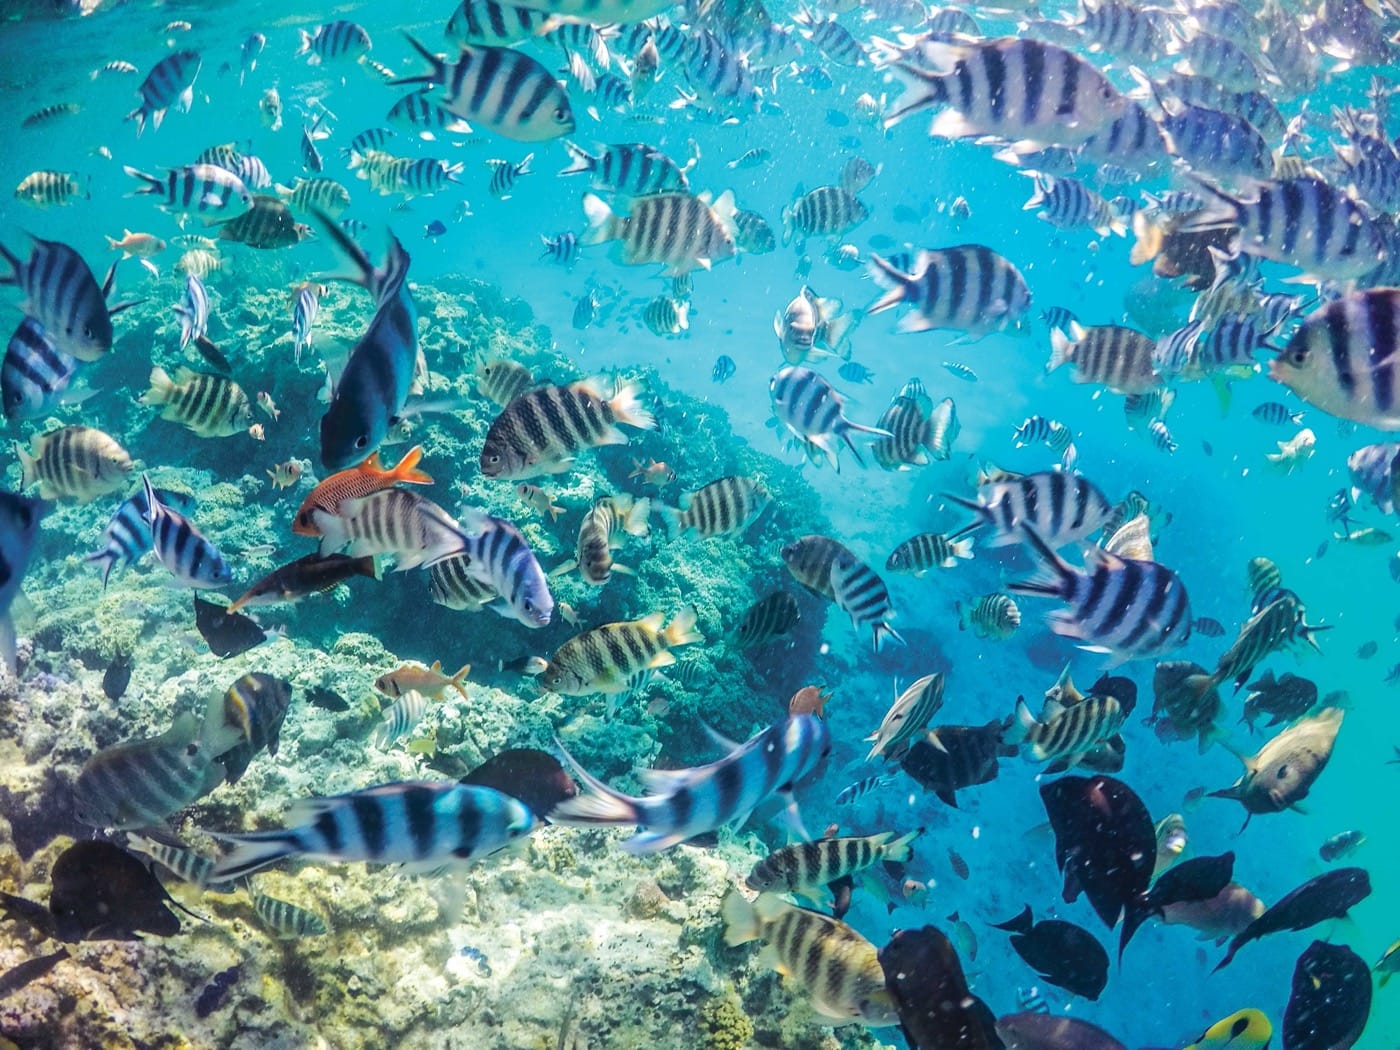 An underwater scene: a school of striped fish, near and far to the camera's lens. A lone, bright orange fish stands out as an interloper